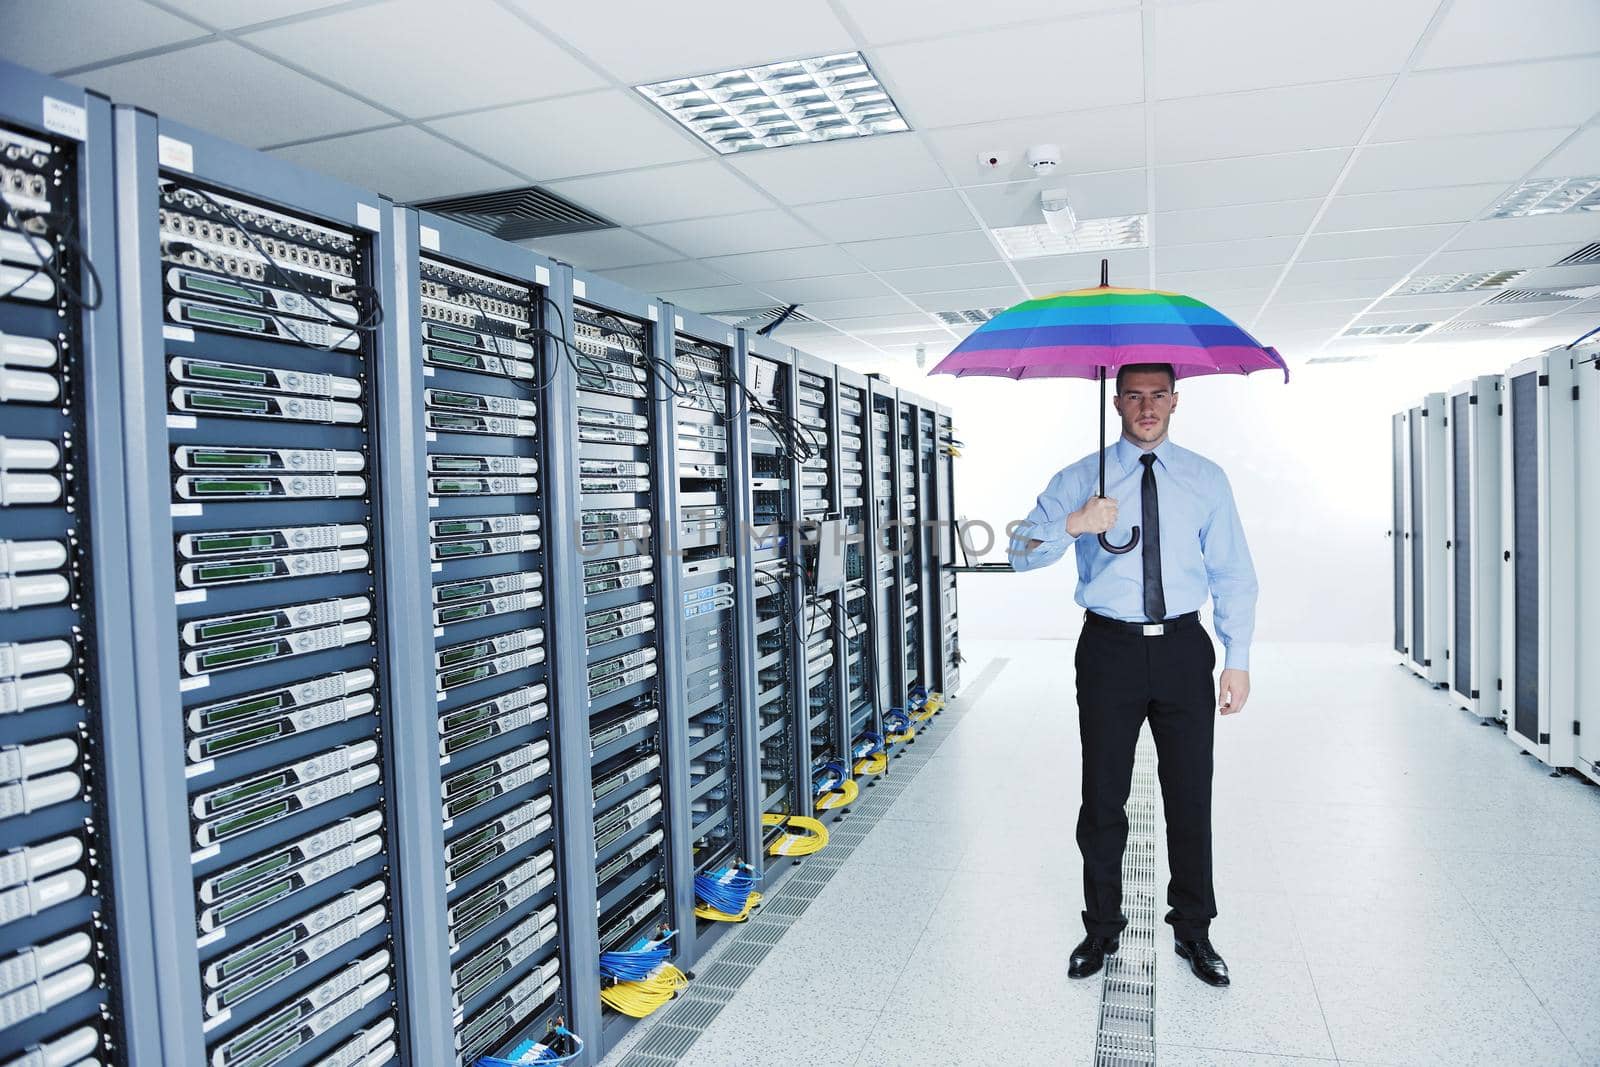 young handsome business man  engineer in 
businessman hold  rainbow colored umbrella in server datacenter room  and representing security and antivirus sofware protection concept